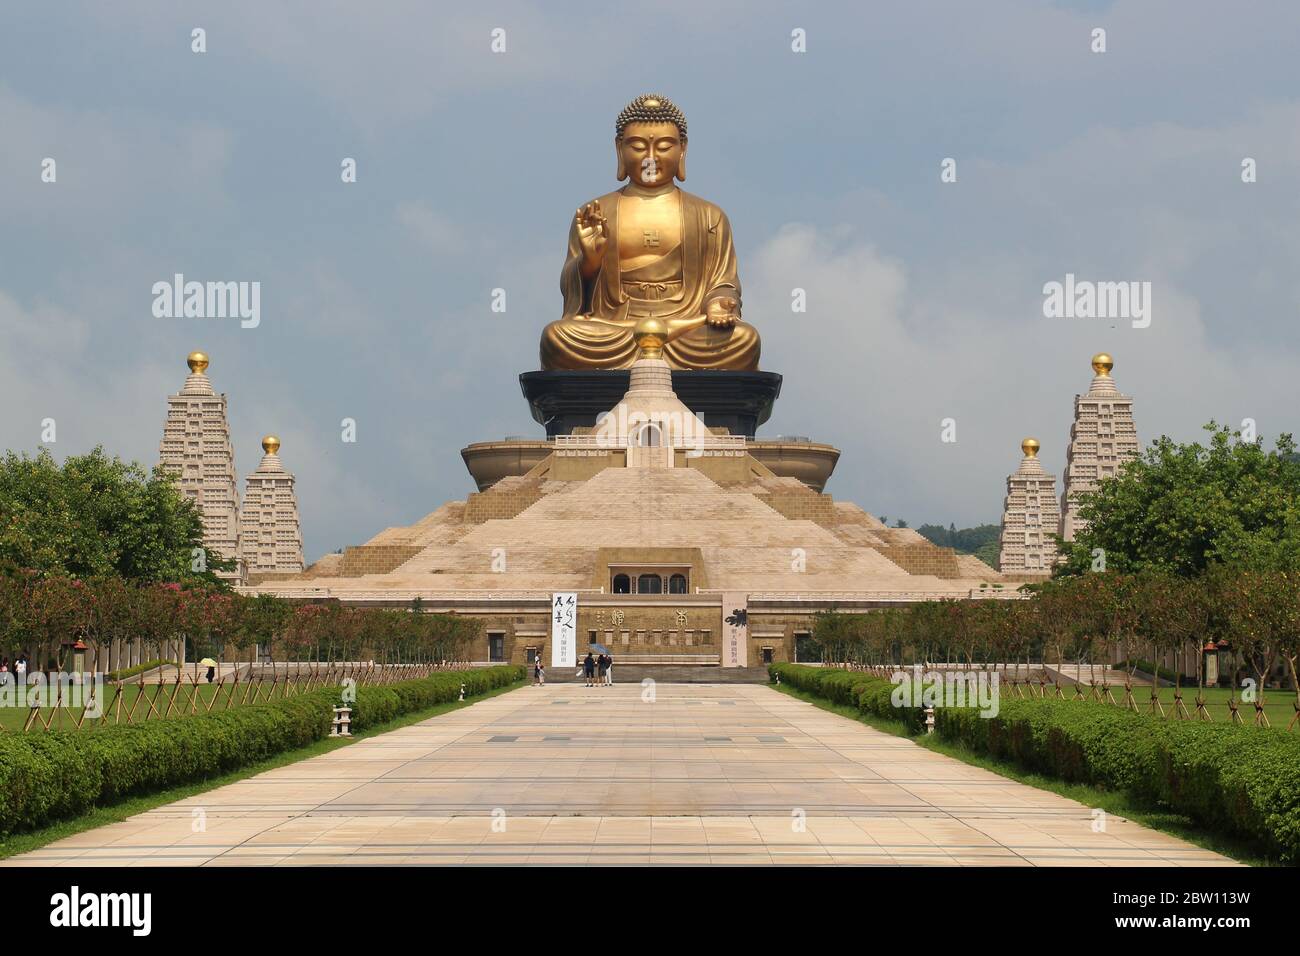 The Fo Guang Shan Monastery, a giant golden praying Buddha on top of a stone pyramid museum. Kaohsiung, Taiwan Stock Photo